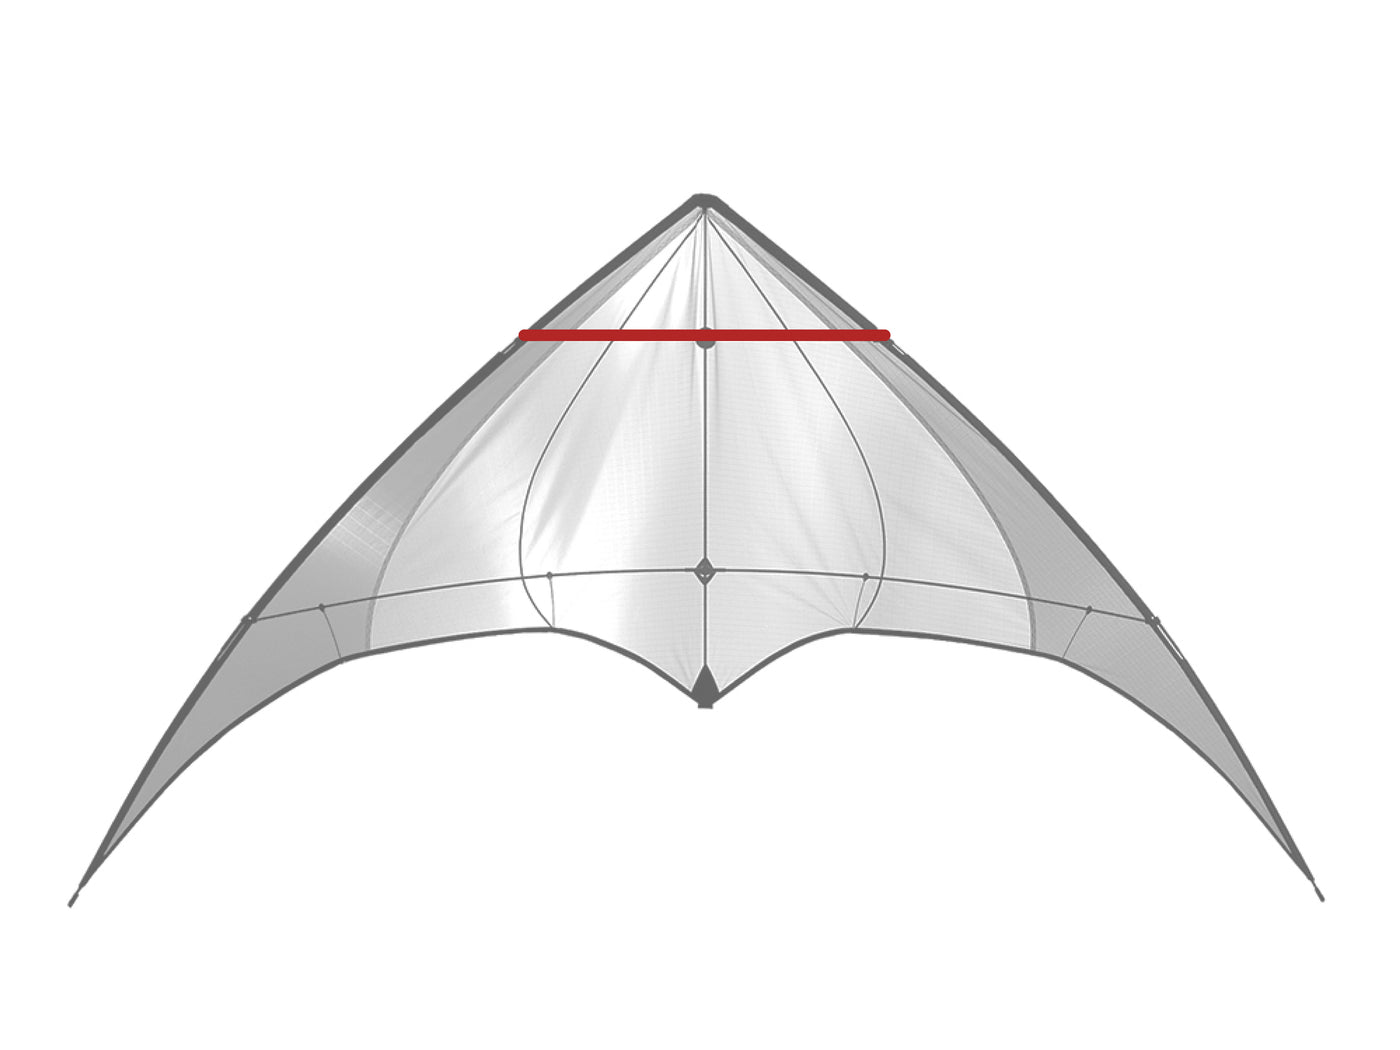 Diagram showing location of the Flashlight Upper Spreader on the kite.